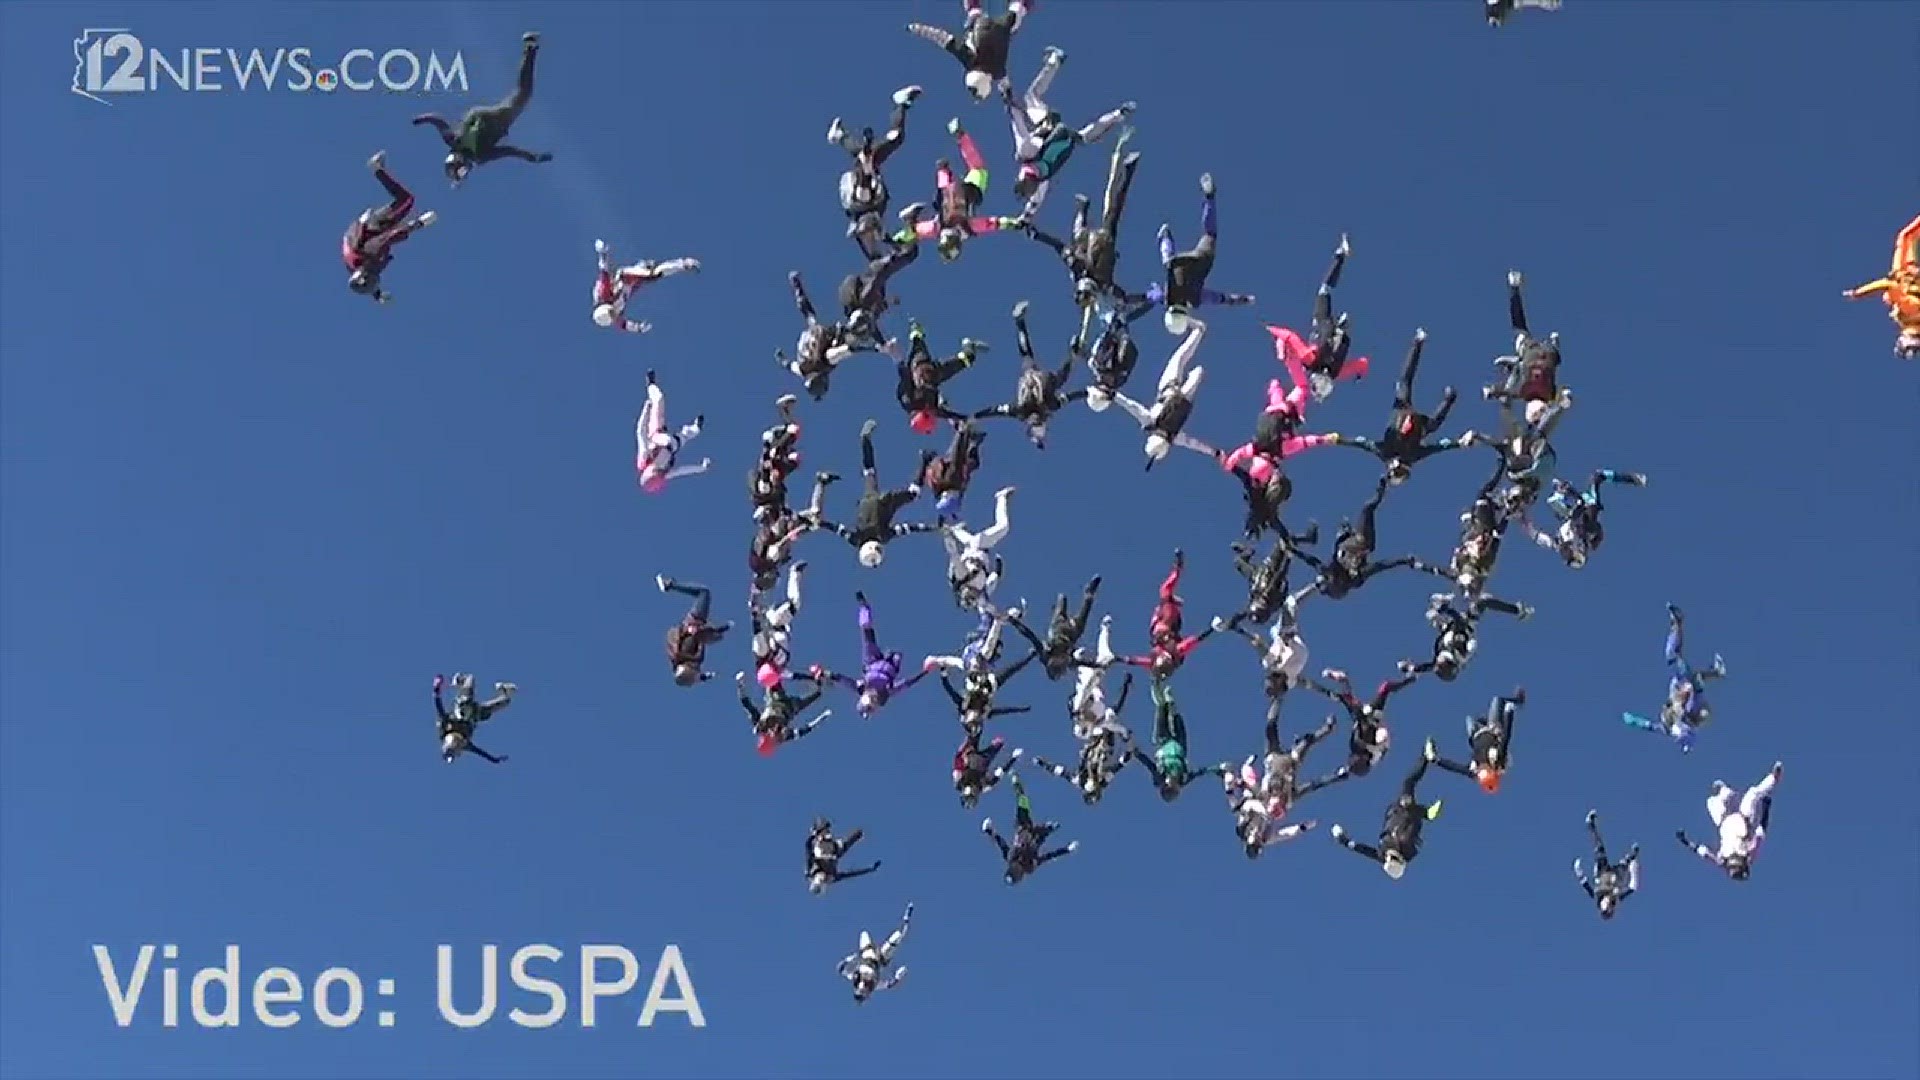 In the clear blue skies over Eloy Sunday at Skydive Arizona, a group of 65 skydivers set a new world record. (Video: USPA)